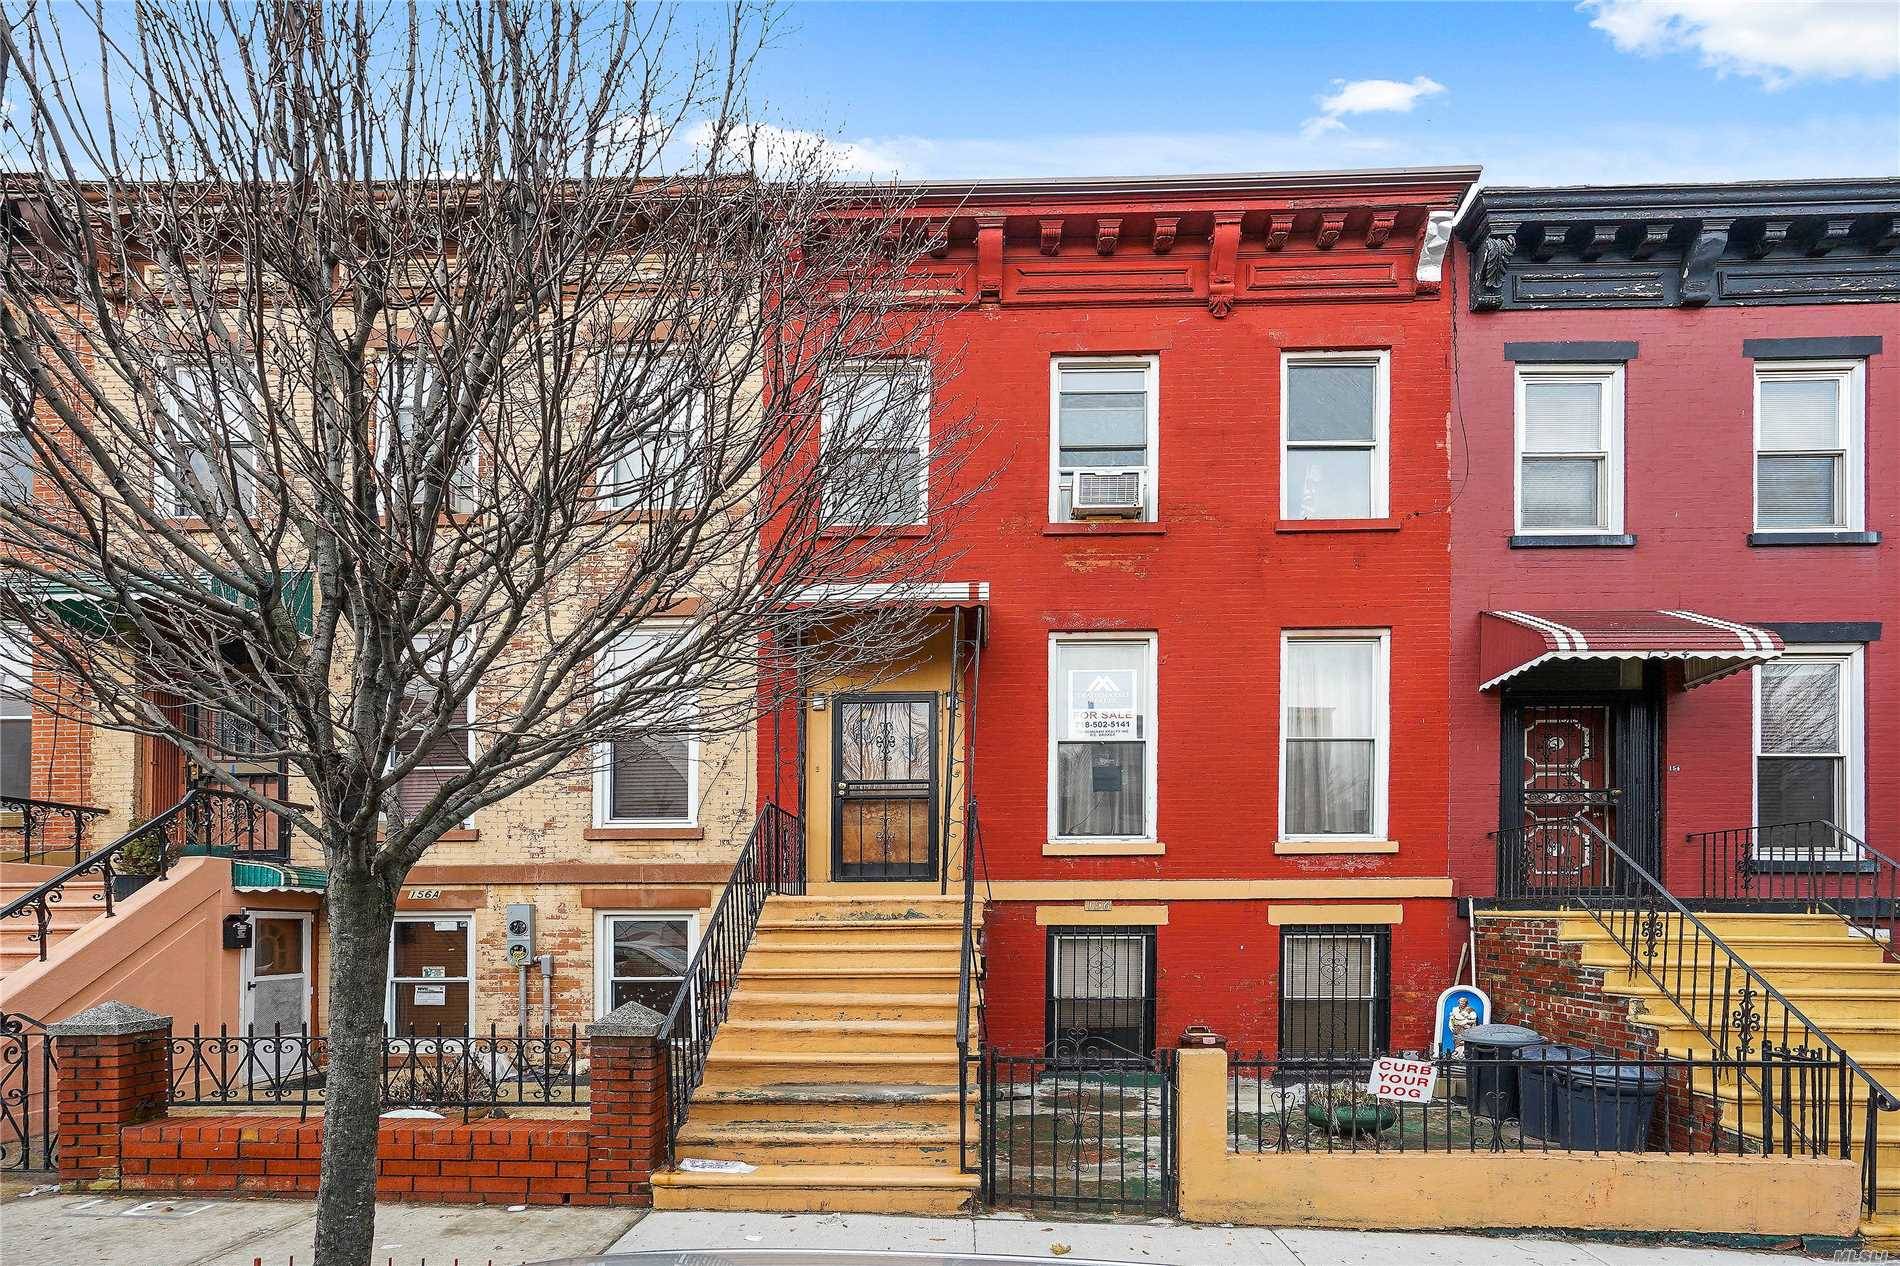 This Is  Three Stories, Two Family Townhouse Conveniently Located On The Border Of Park Slope And Greenwood Heights And Sits On A 20 Foot-Wide Lot.